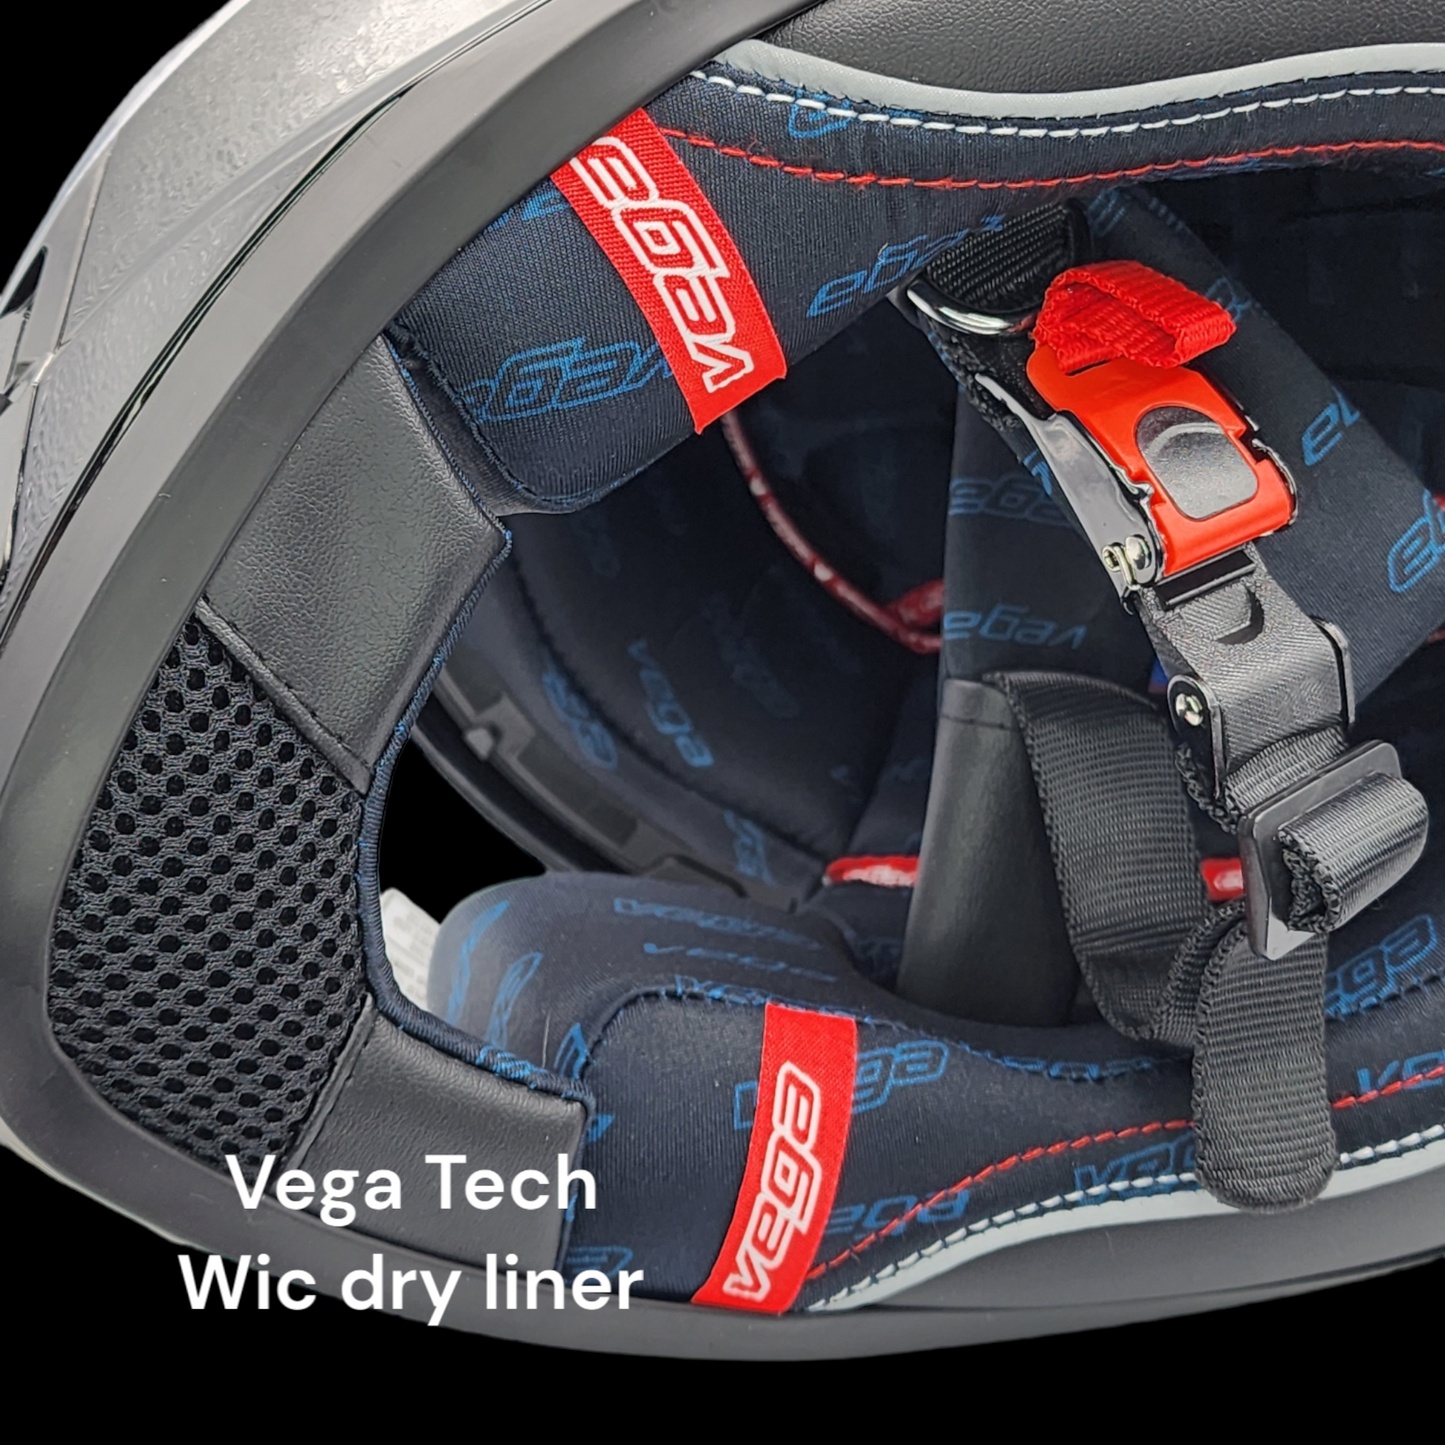 Vega AIR GPX Motorcycle Helmet - Fortune - Special Innovated Design